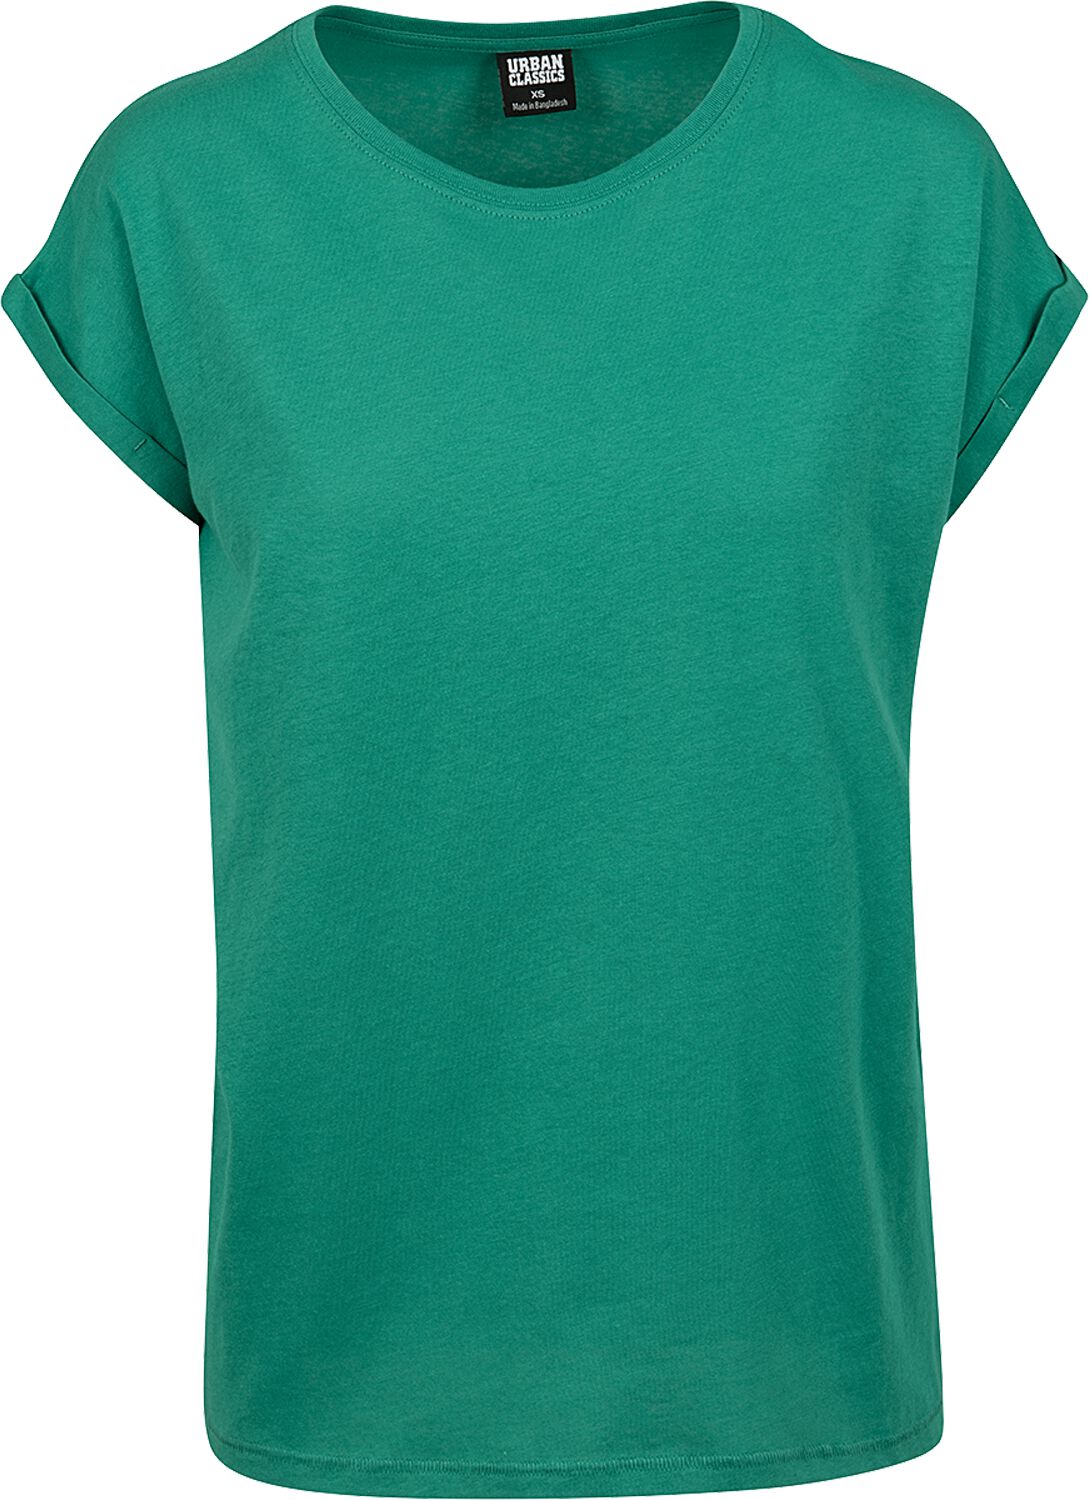 Image of T-Shirt di Urban Classics - Ladies Extended Shoulder Tee - M a 5XL - Donna - verde